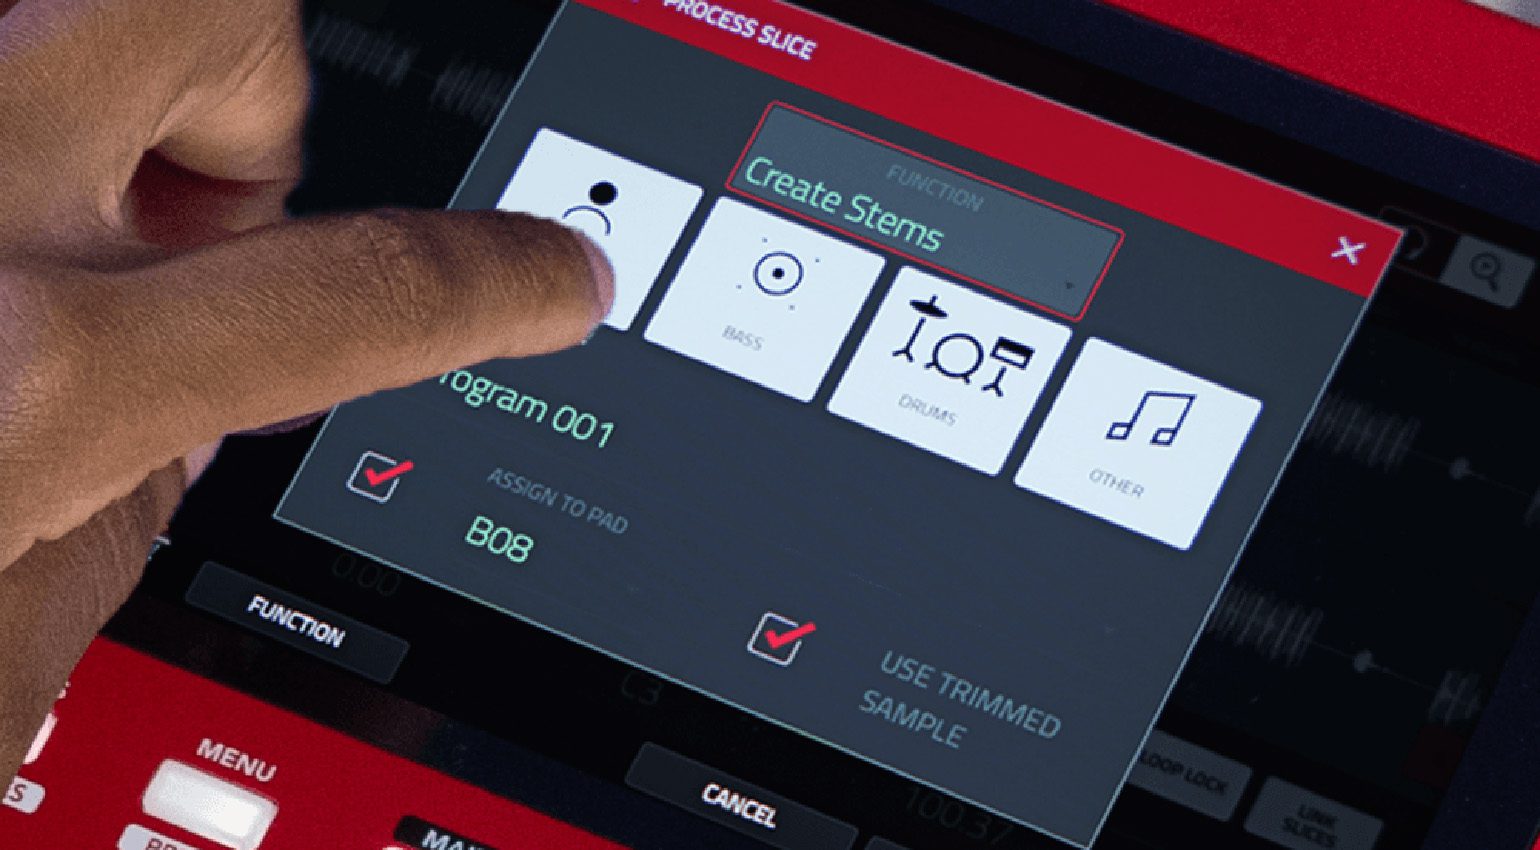 Is AKAI Professional about to unveil the MPC Live III at NAMM? 